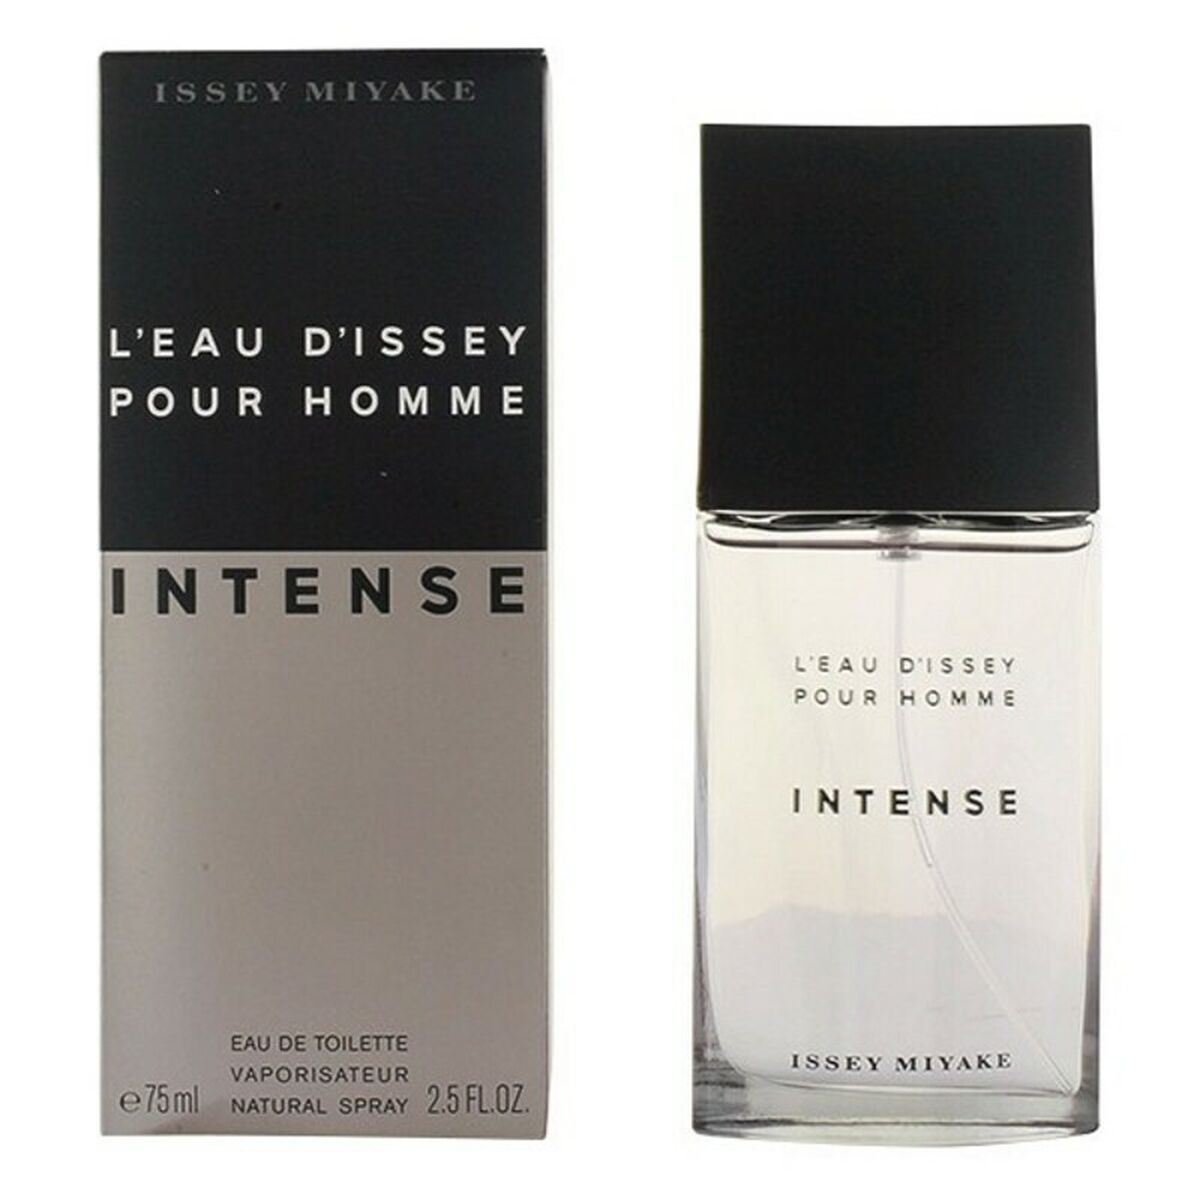 Herenparfum Issey Miyake EDT L'eau D'issey Pour Homme Intense (125 ml)